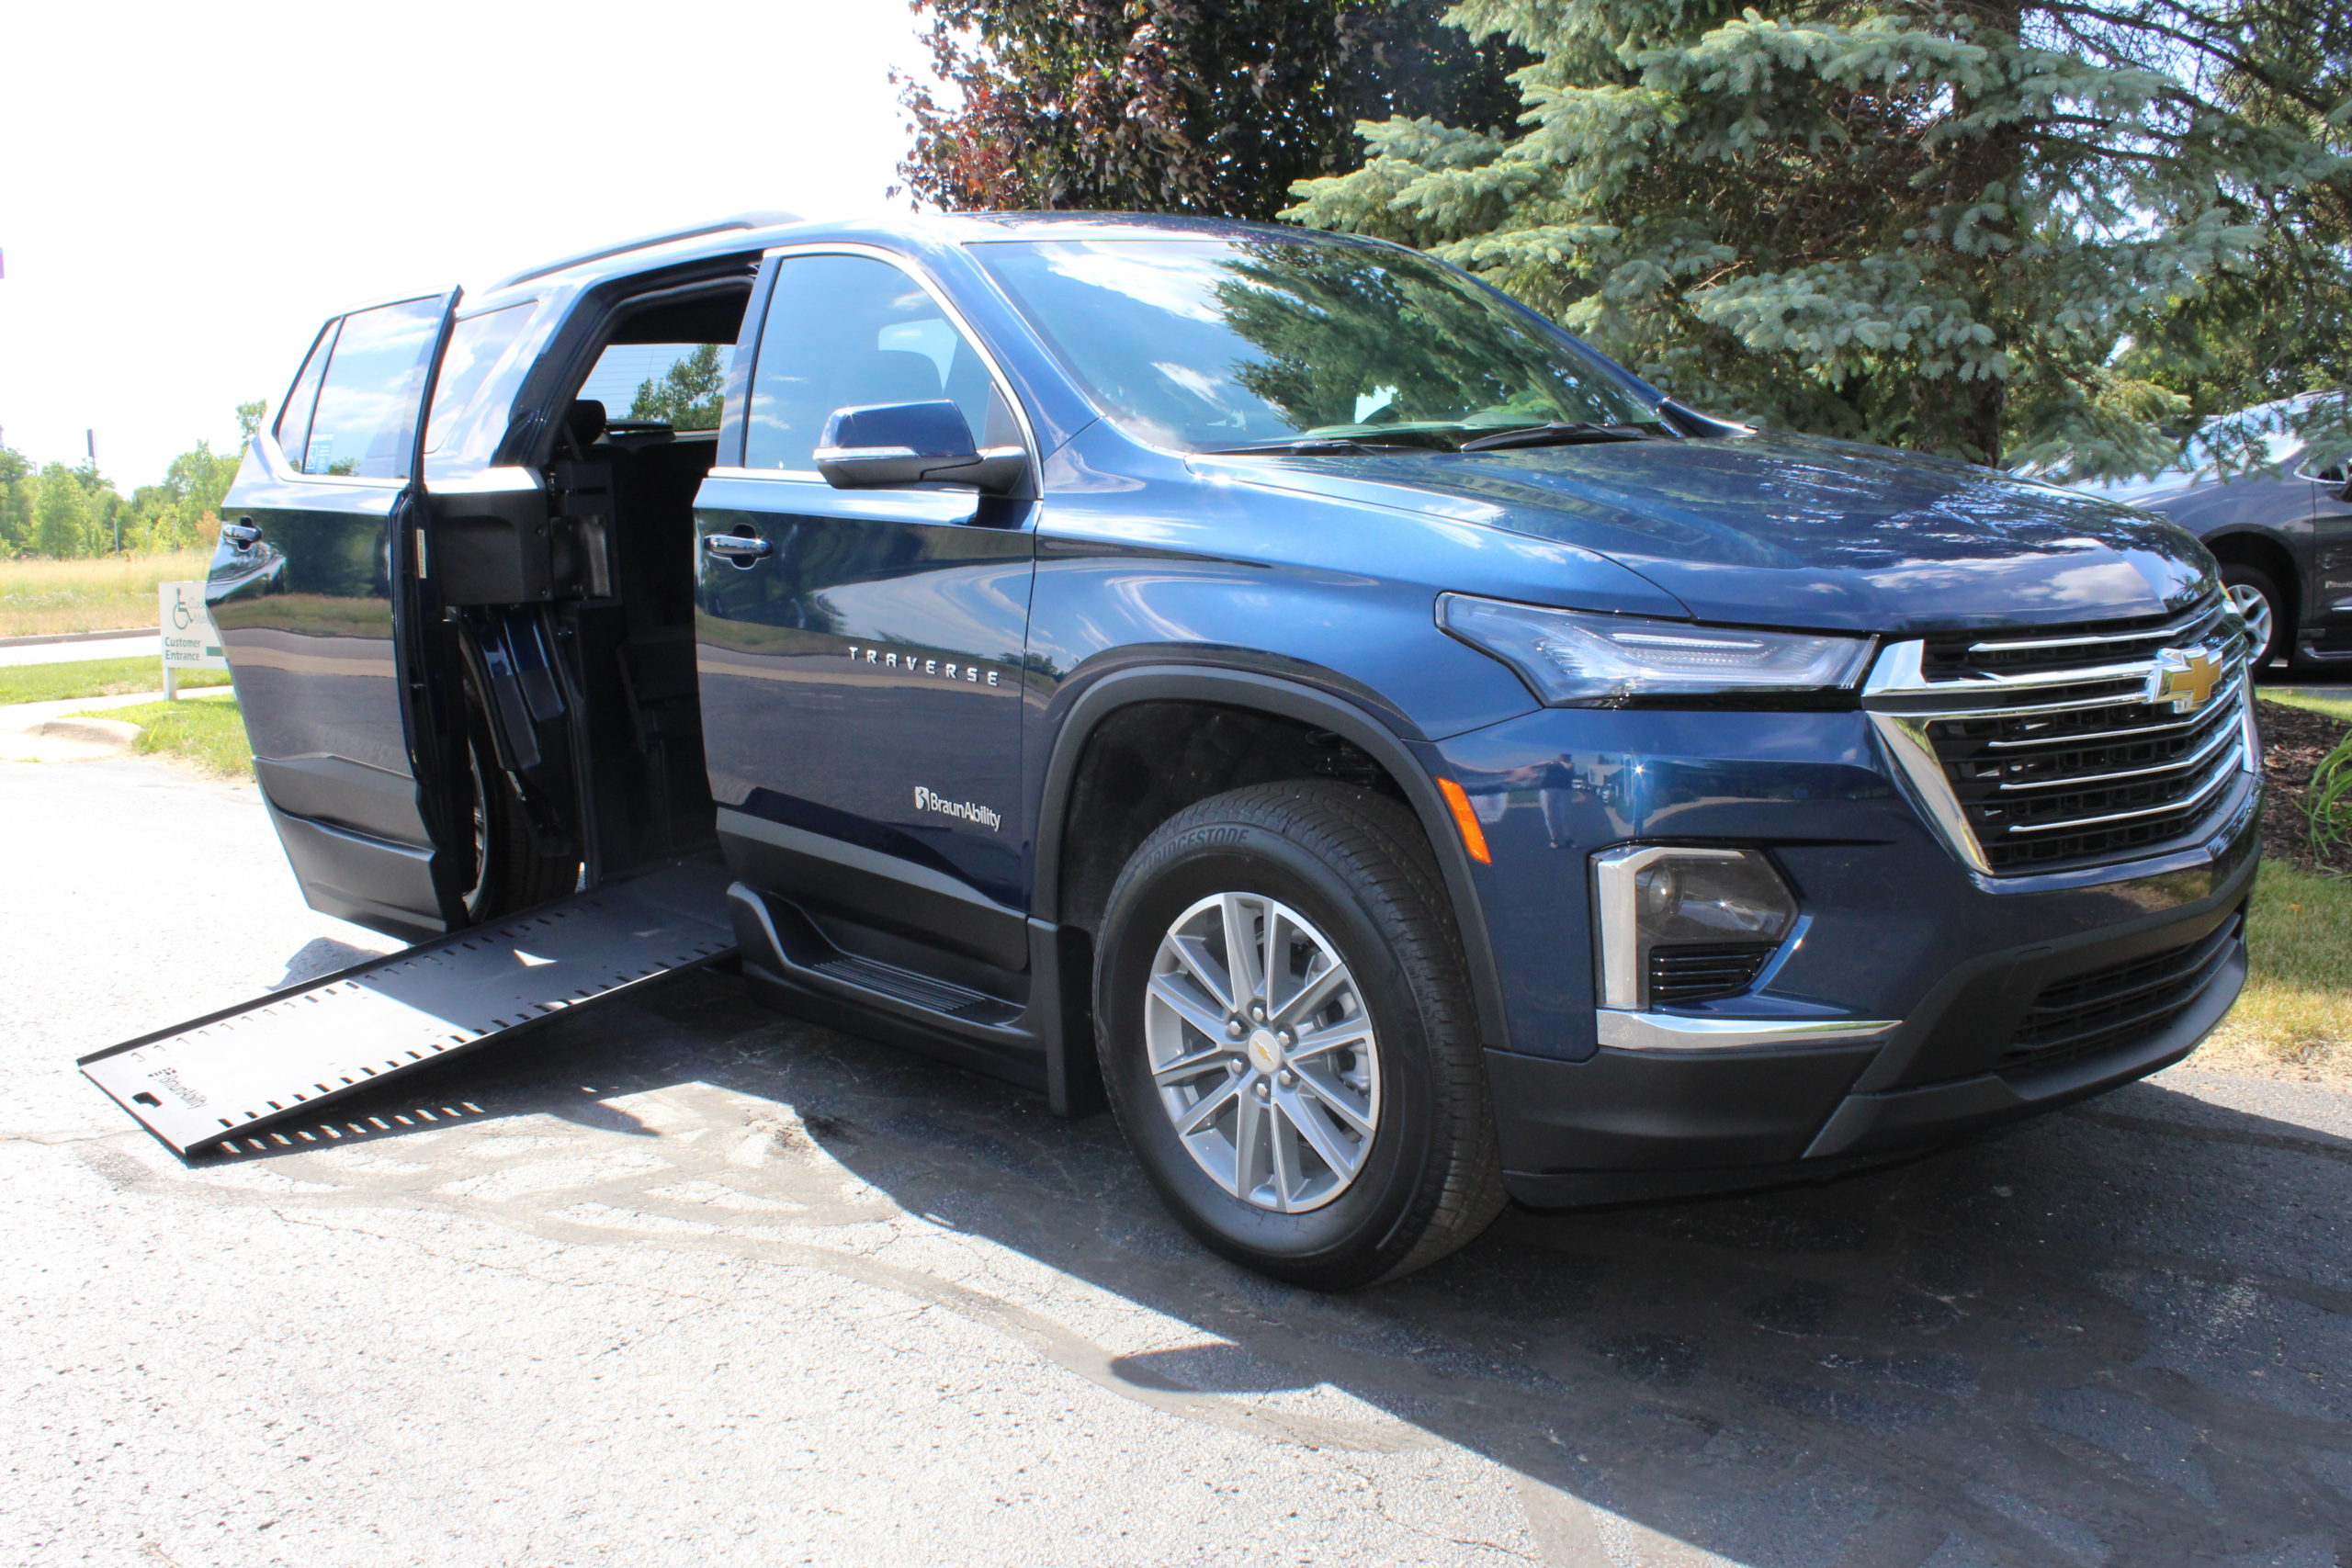 2022 Northsky Blue Chevy Traverse 1LT with BraunAbility XI Conversion